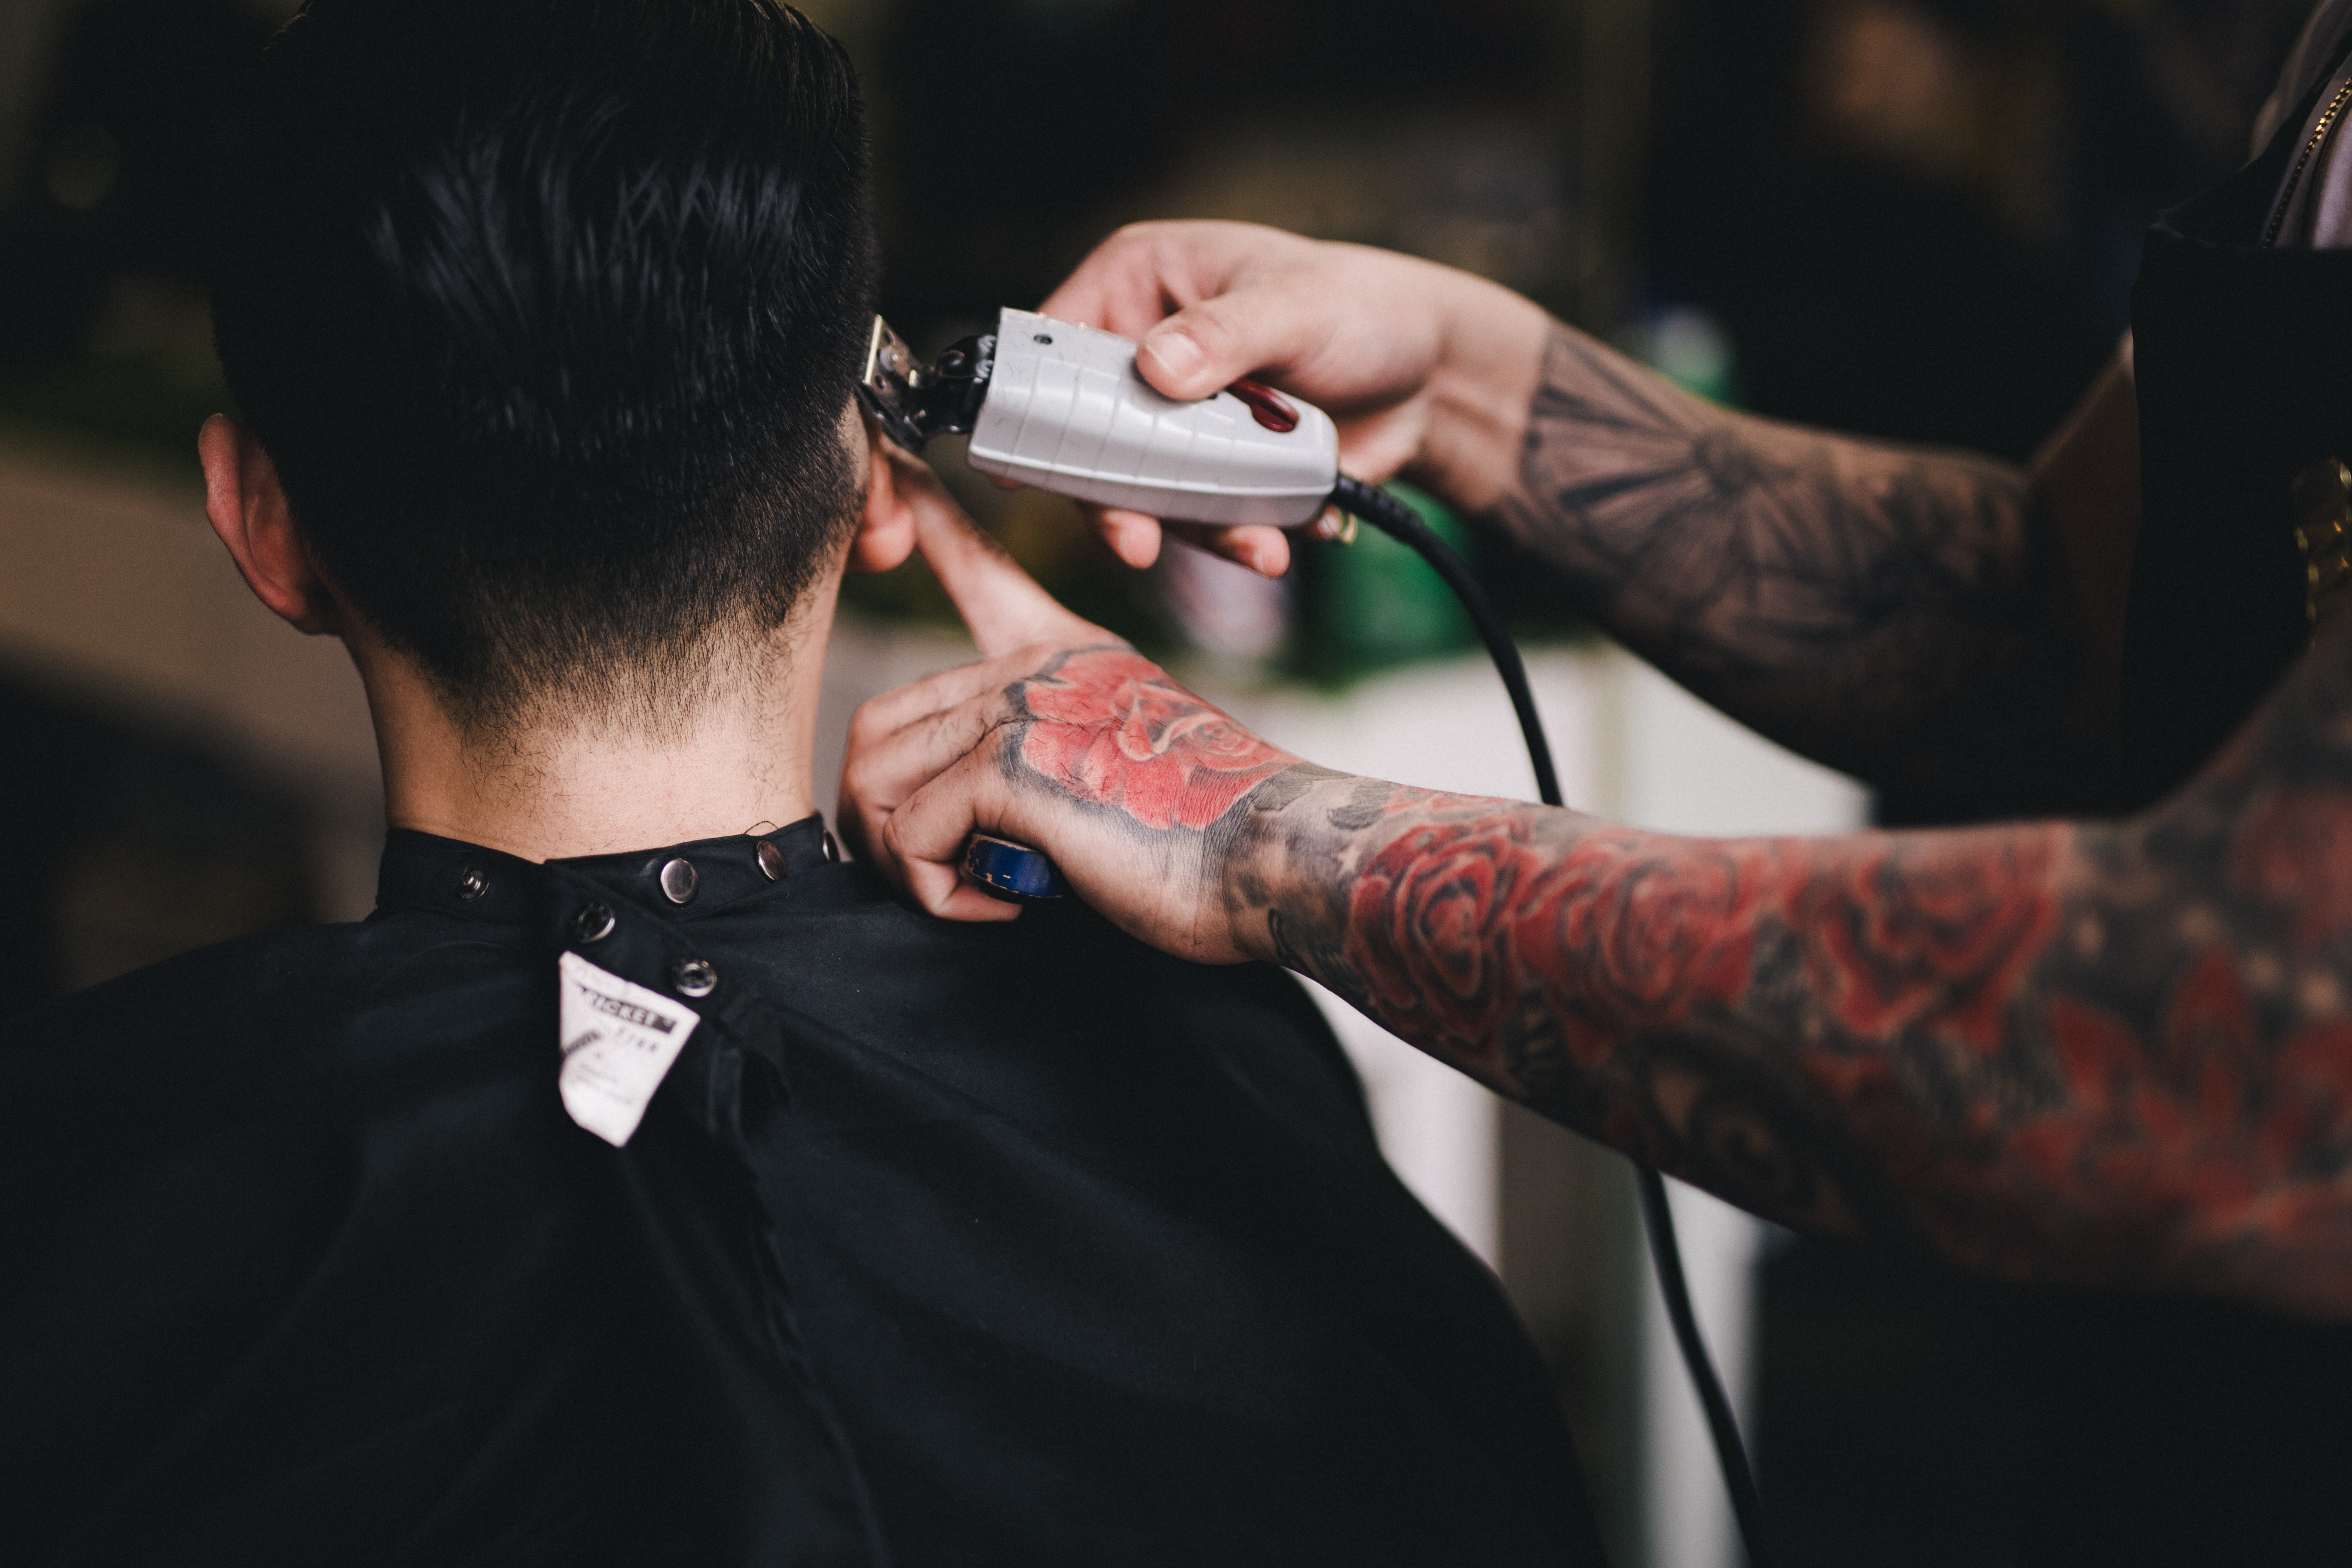 Lions Barber Collective: Supporting Men's Mental Health